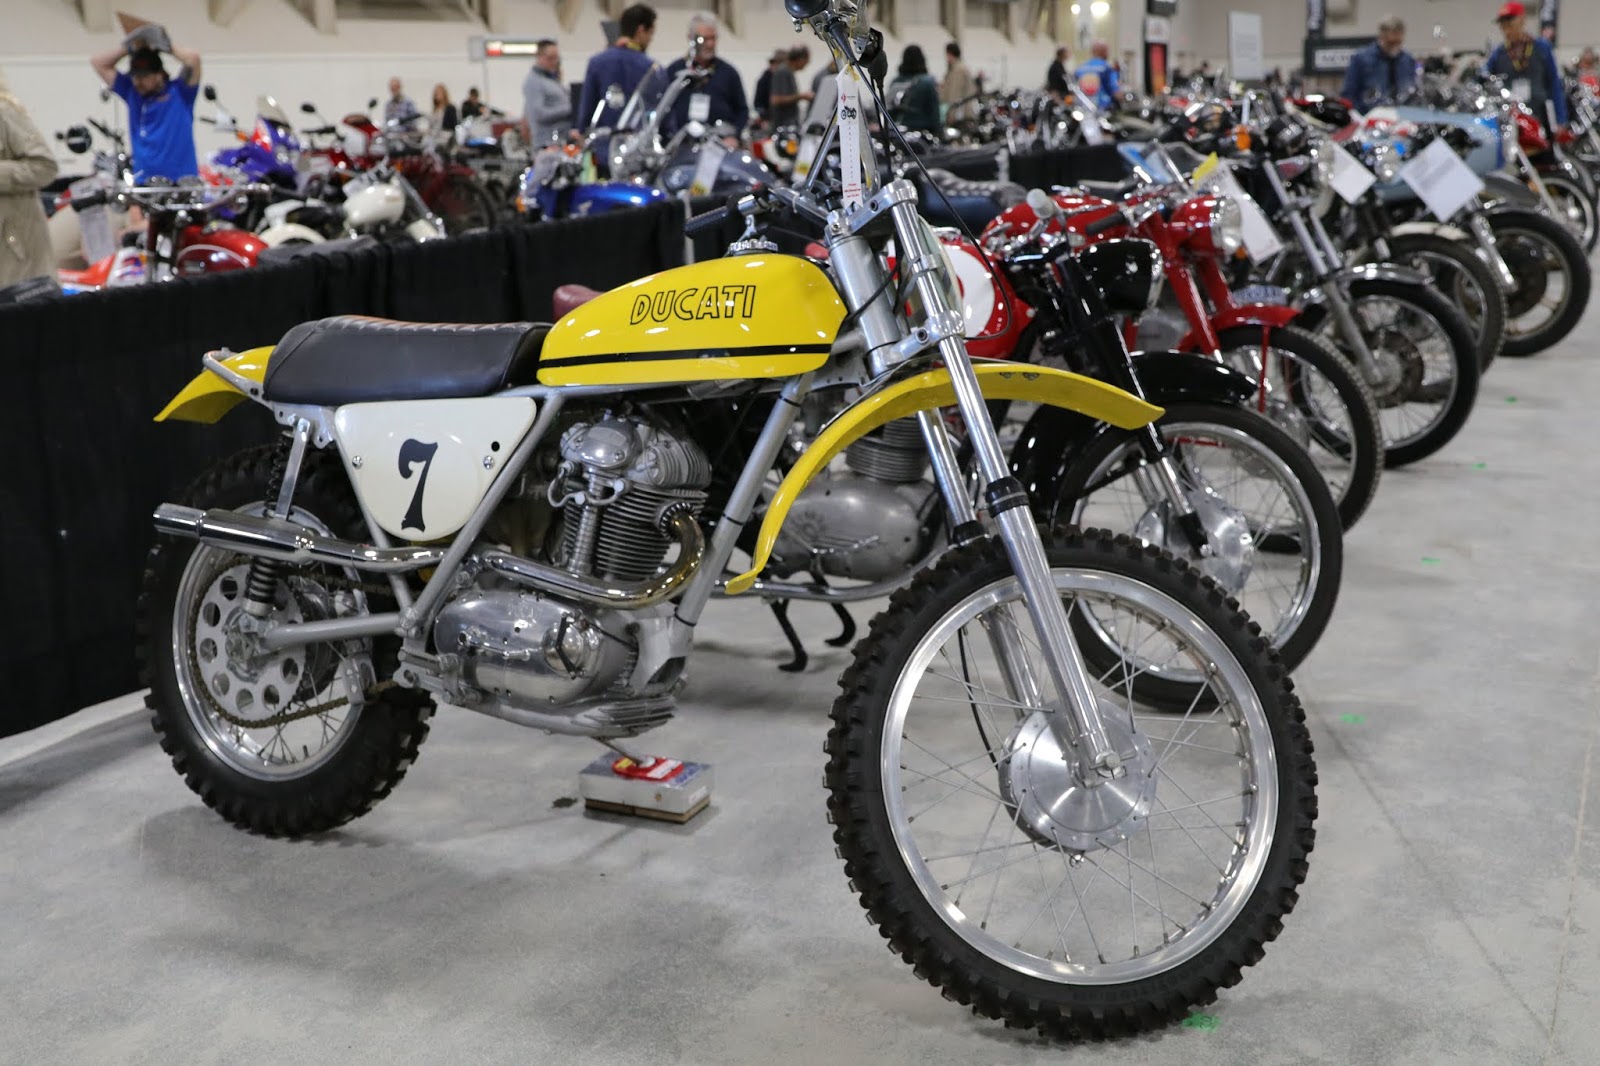 OldMotoDude 1971 Ducati 450 RT sold for 6,600 at the